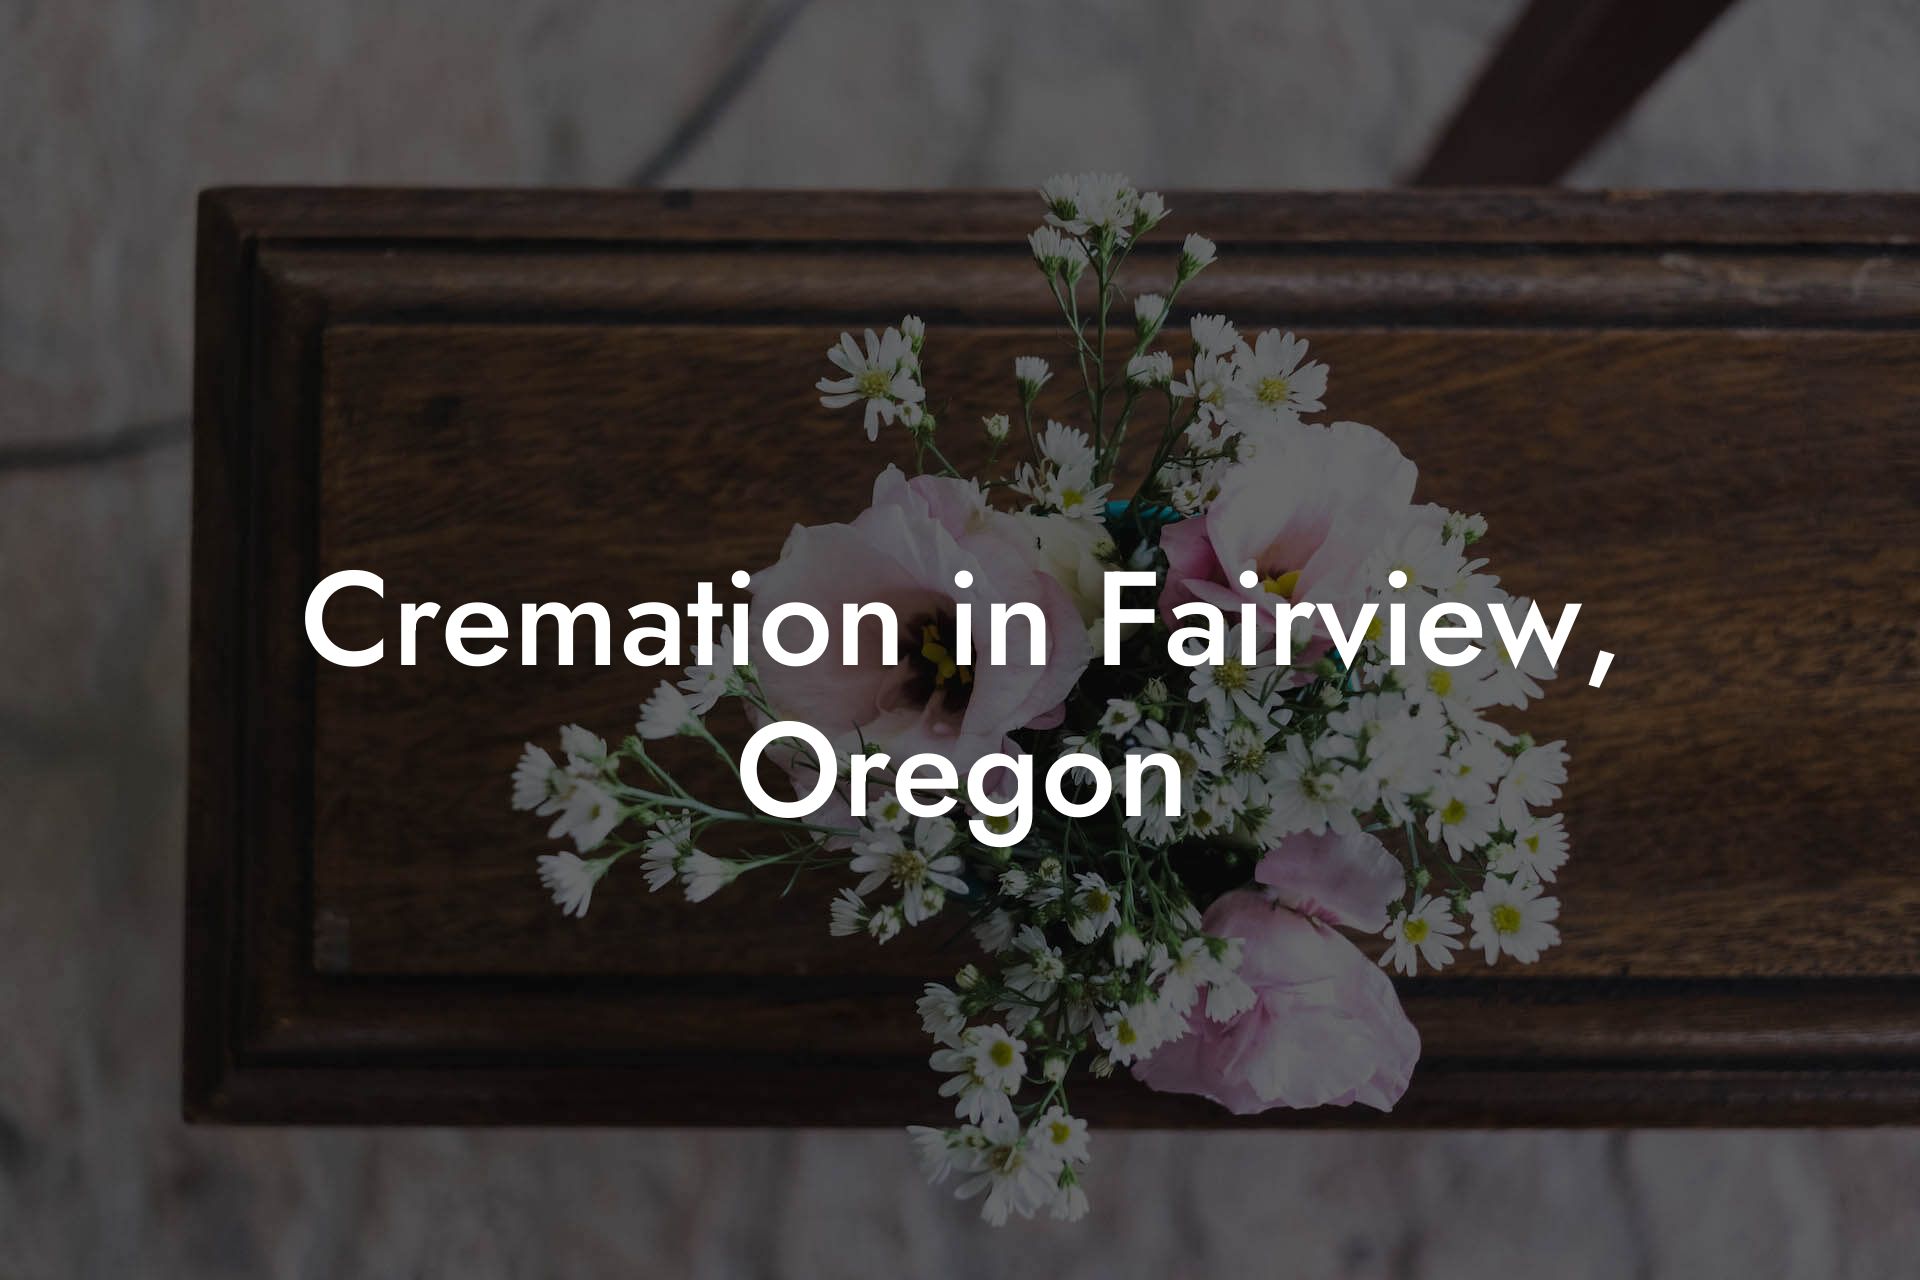 Cremation in Fairview, Oregon